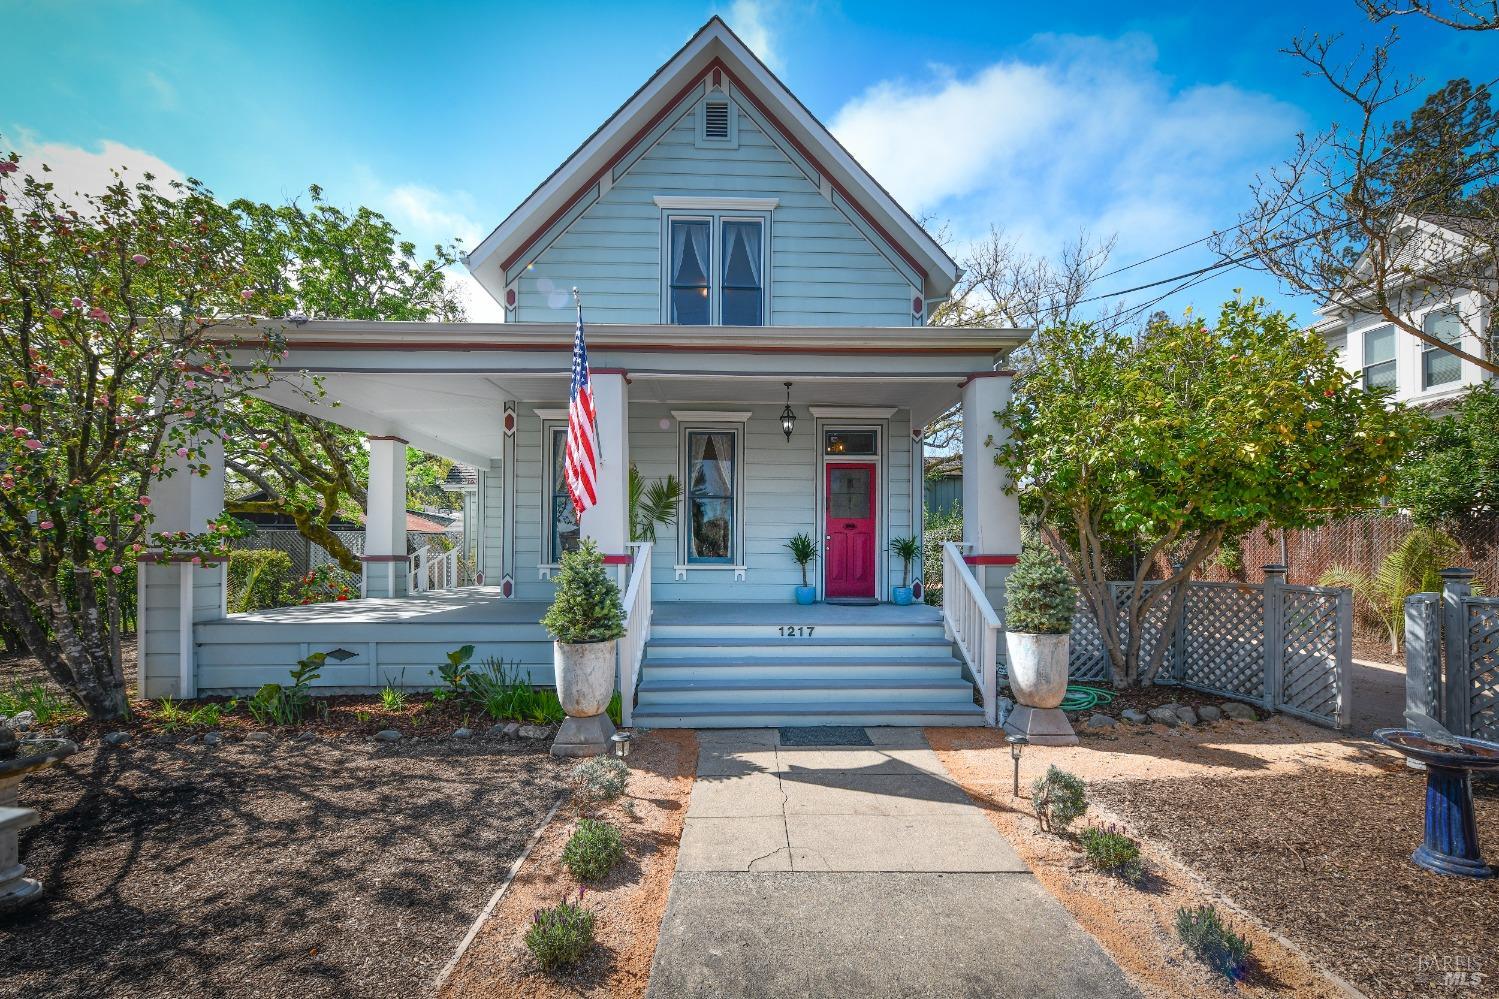 Photo of 1217 Edwards St in St Helena, CA